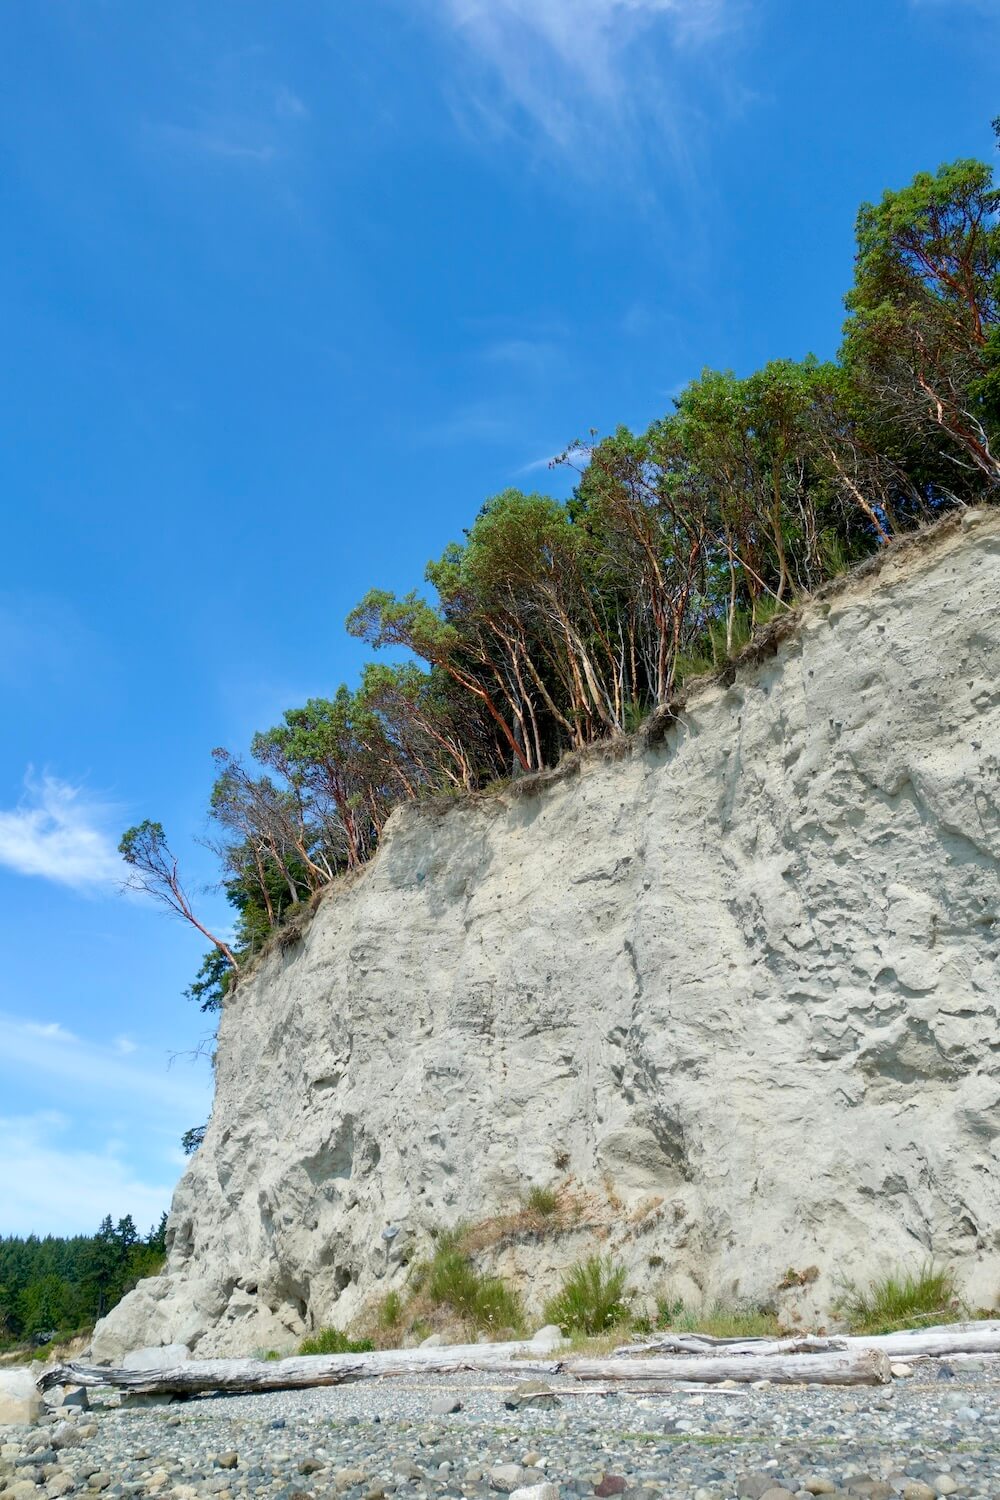 The steep cliffs of whitish dirt lead up to a forest of madrona and cedar trees clinging to the land for dear life.  The sky is blue and the beach below is made up of round pebbles and larger boulders.